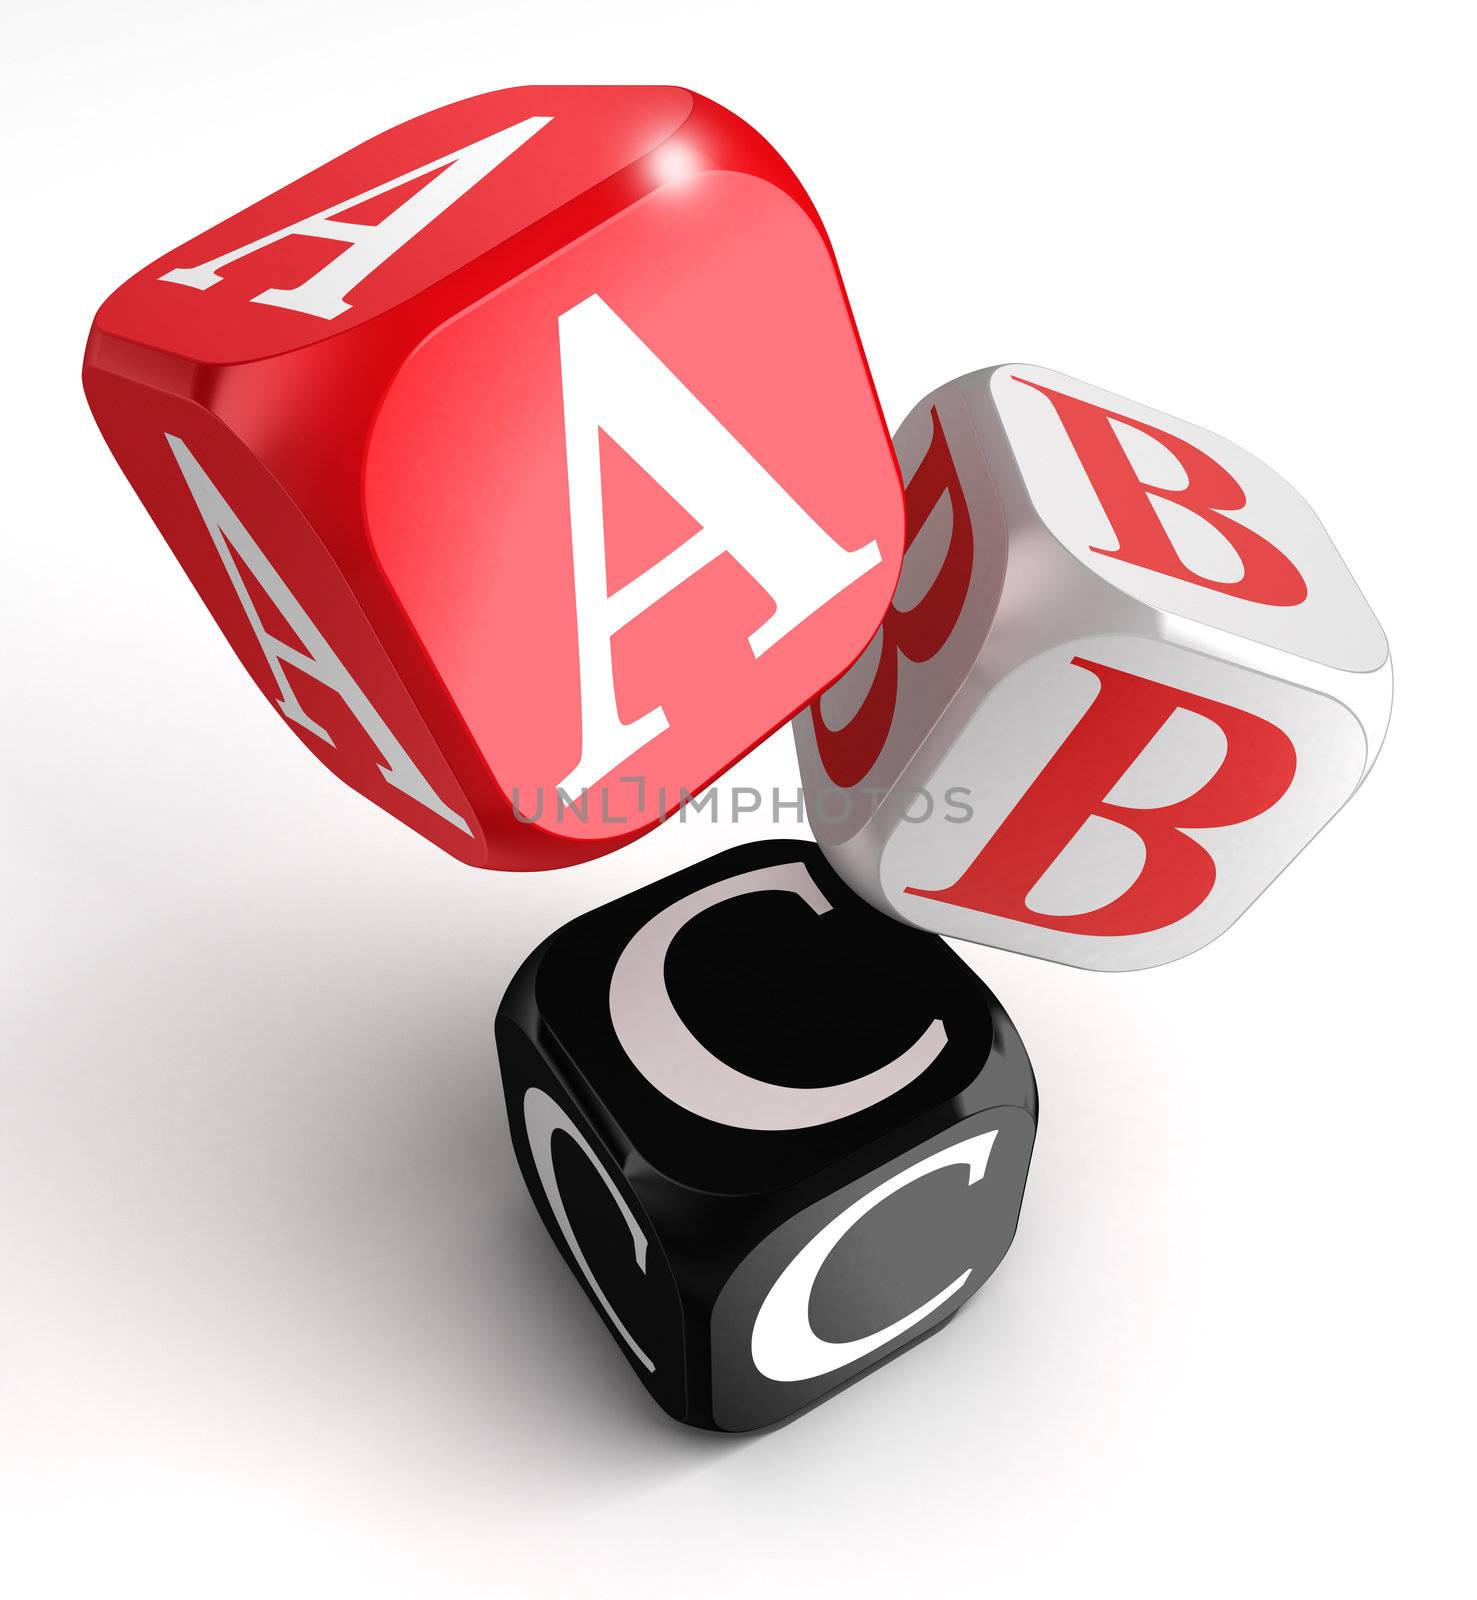 A,B and C on red, white and black box on white background